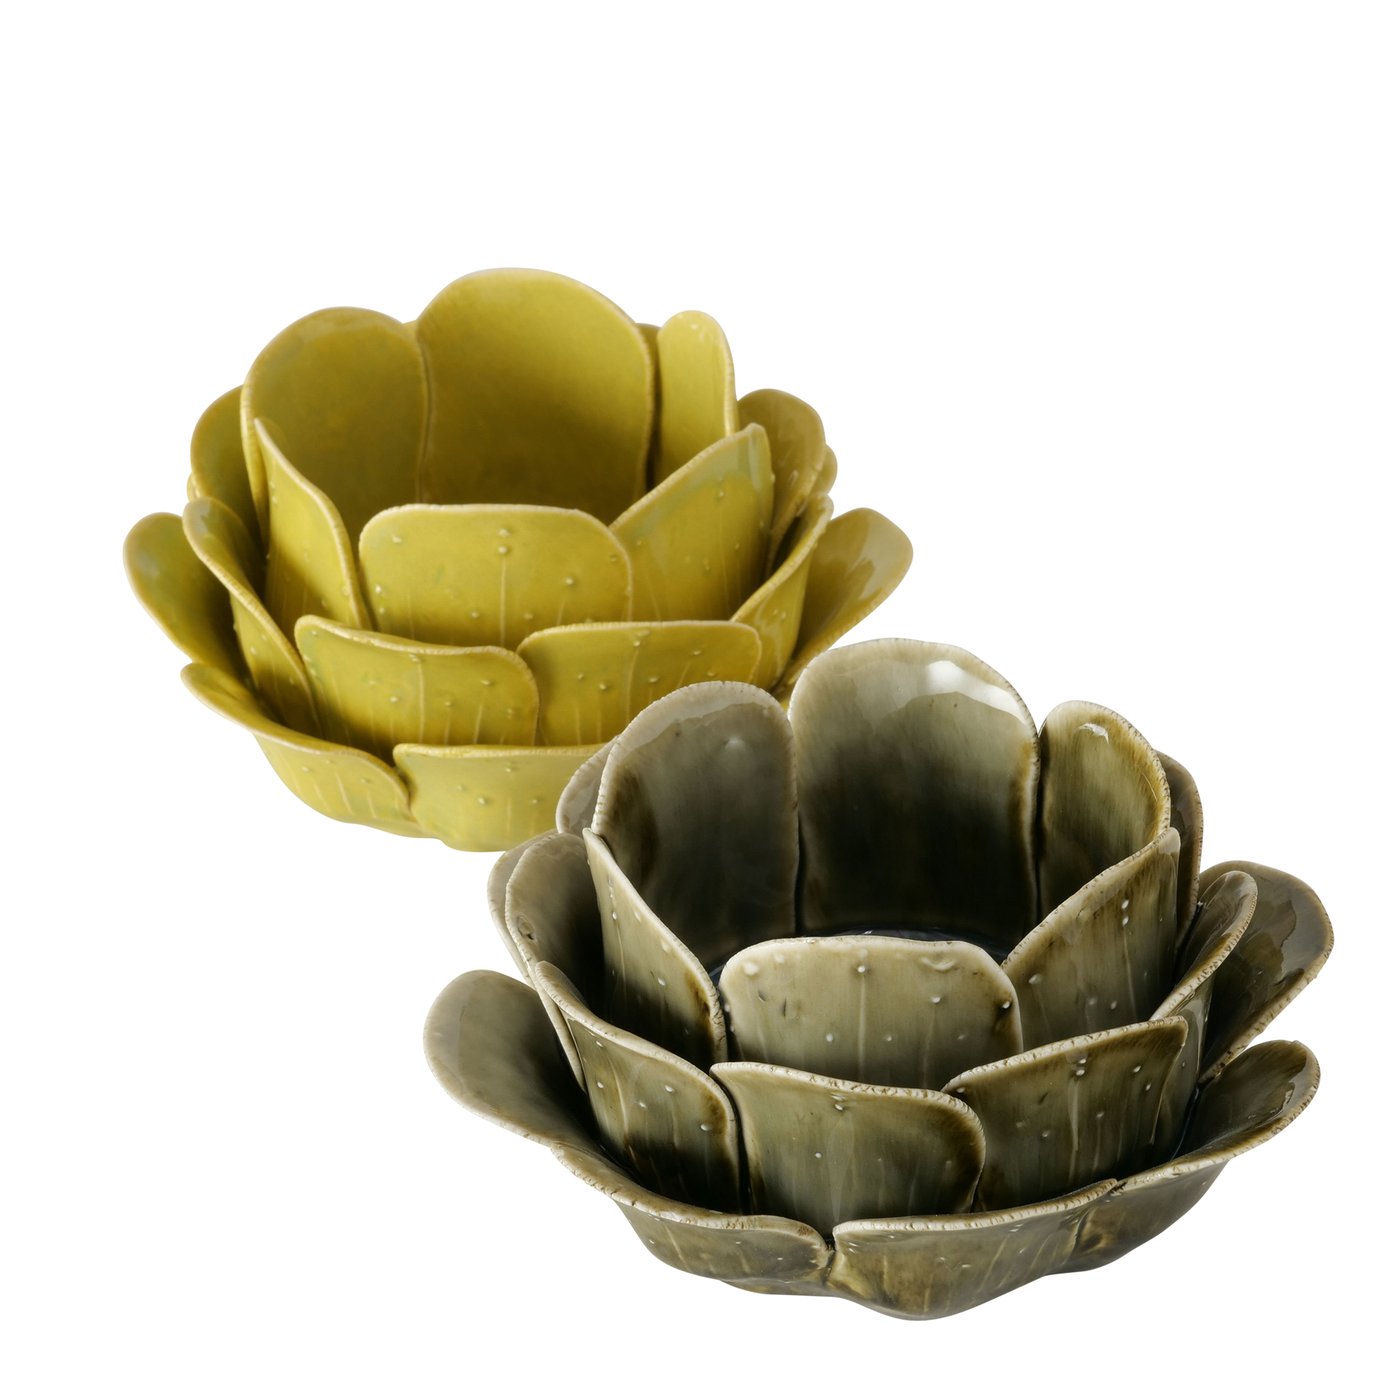 &Quirky Ceramic Flower Candle Holder : Light Green or Dark Green